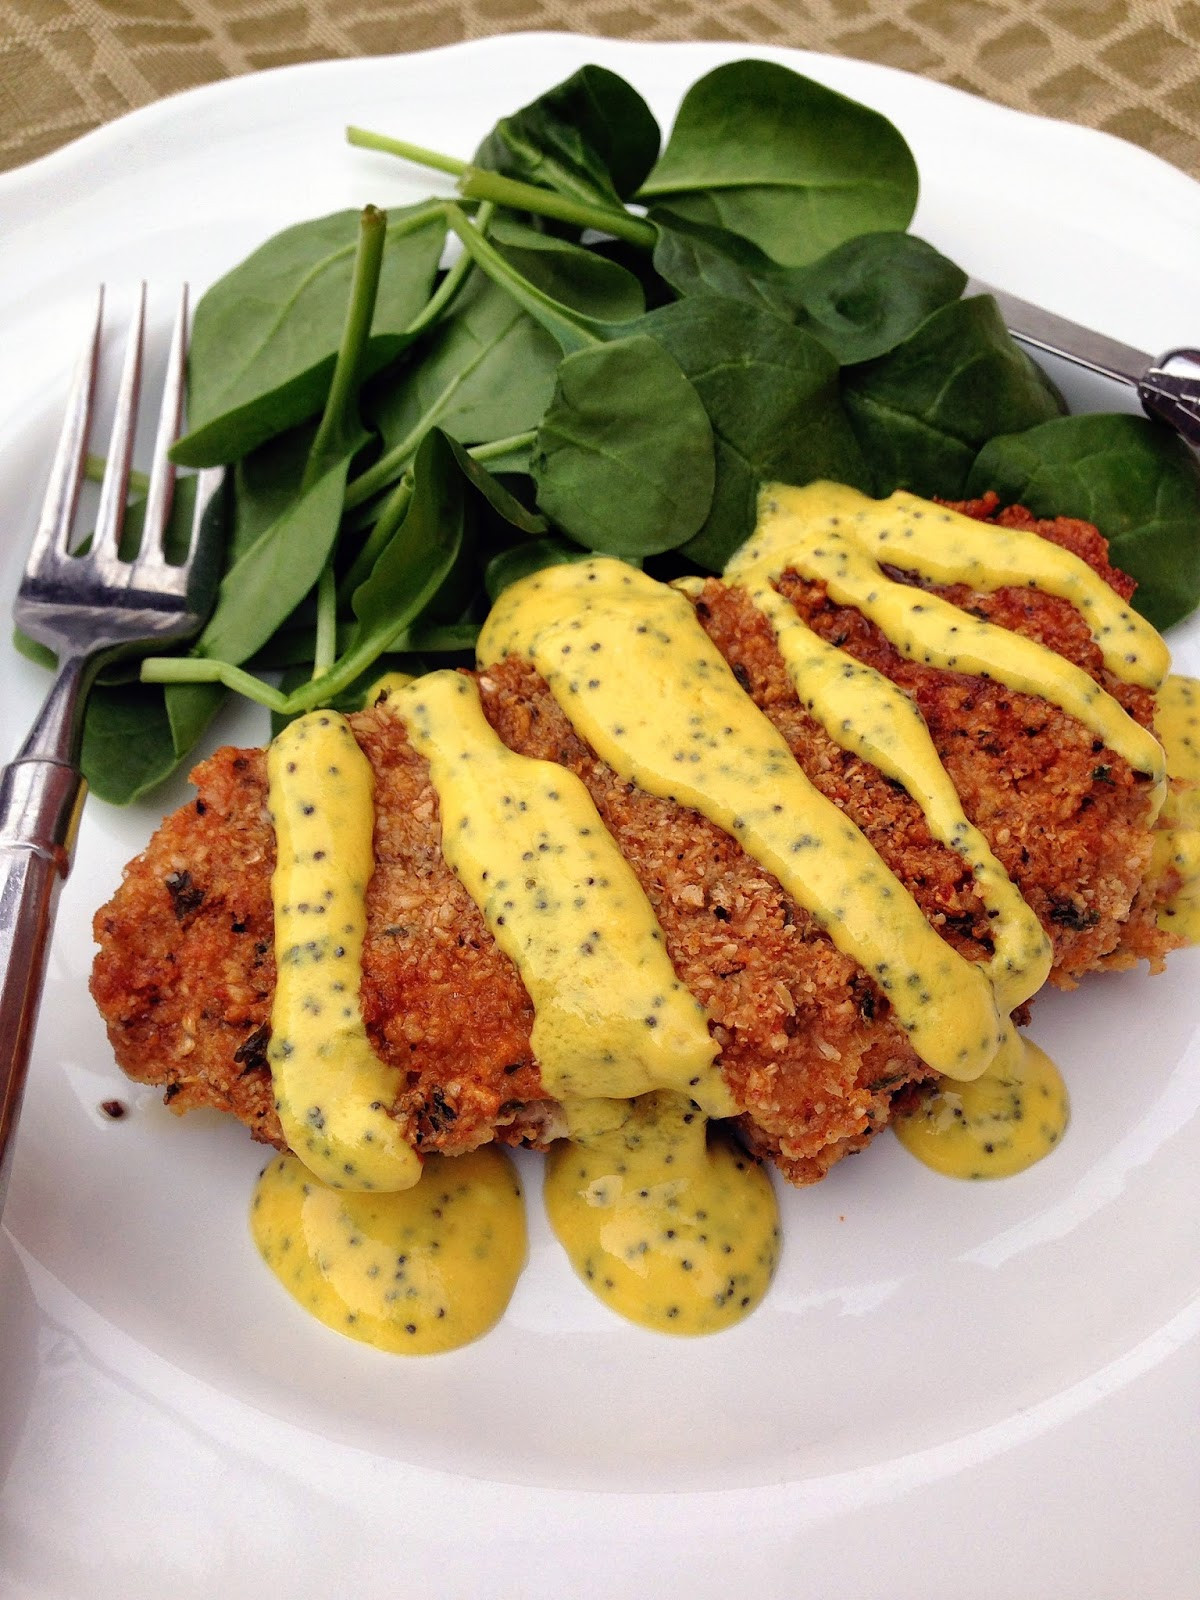 Healthy Sauces For Chicken
 taylor made healthy pan "fried" chicken with poppyseed